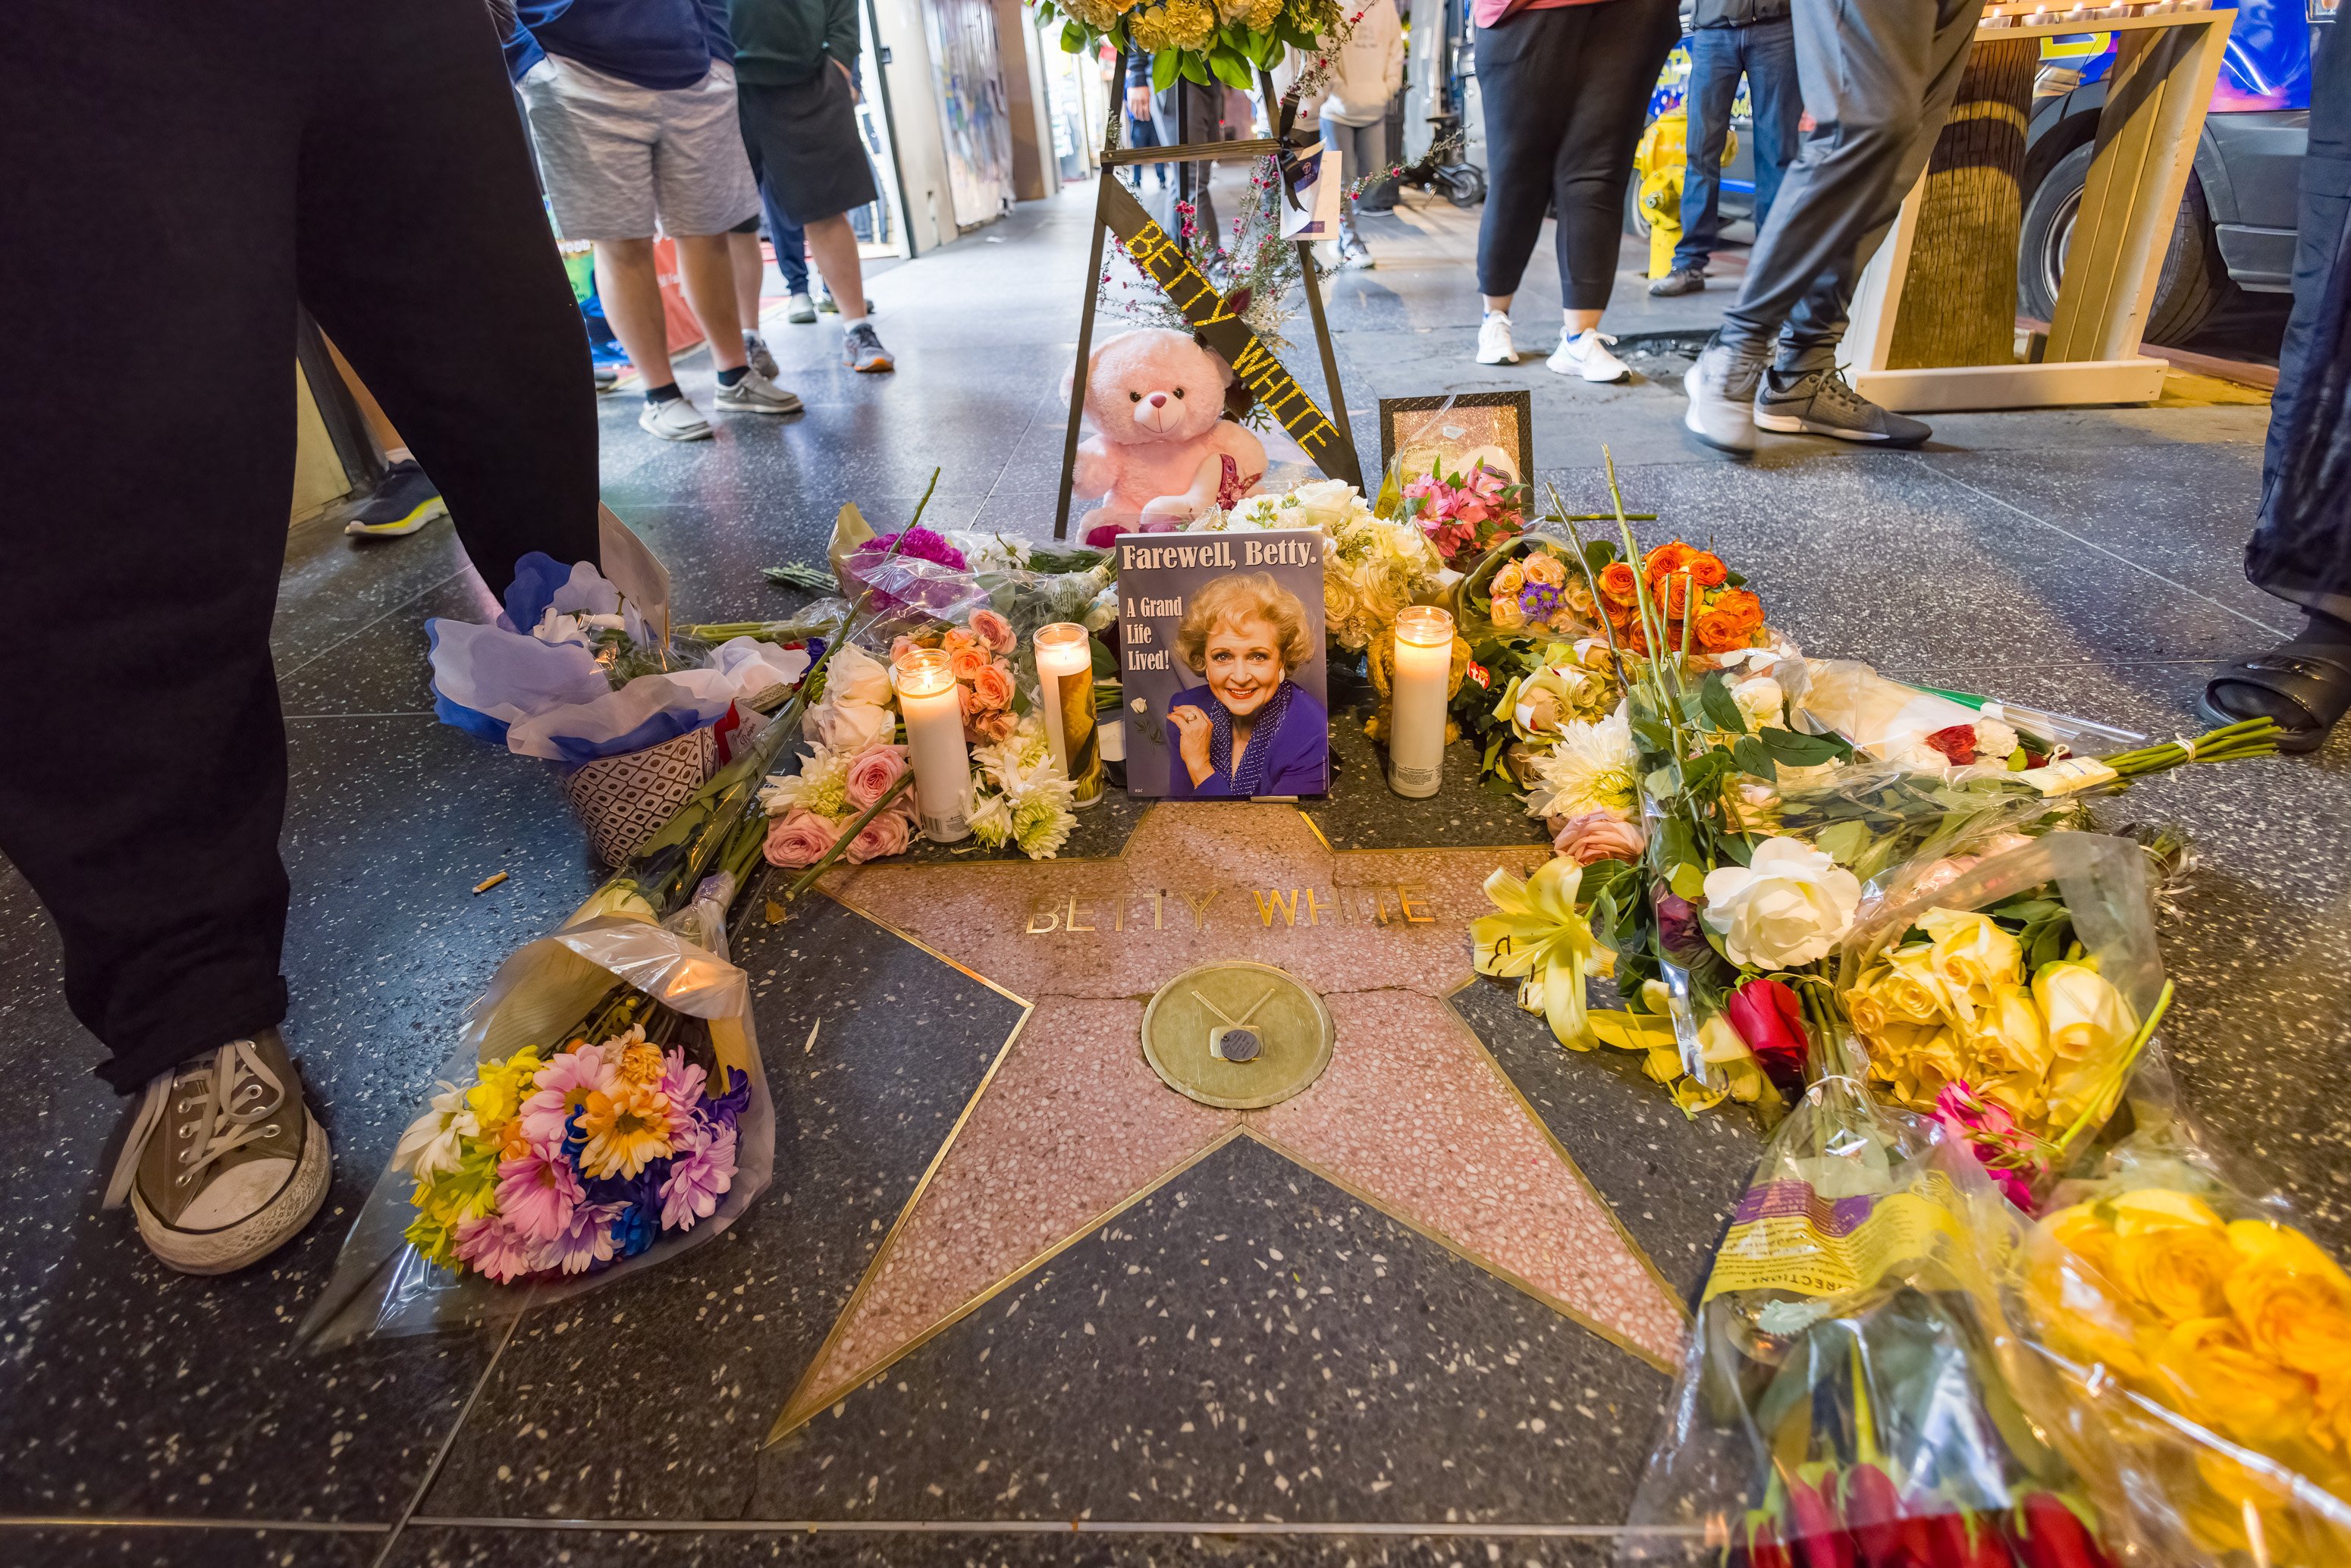 Following Betty White's death, fans flocked to her star on the Hollywood Walk of Fame to set up a memorial